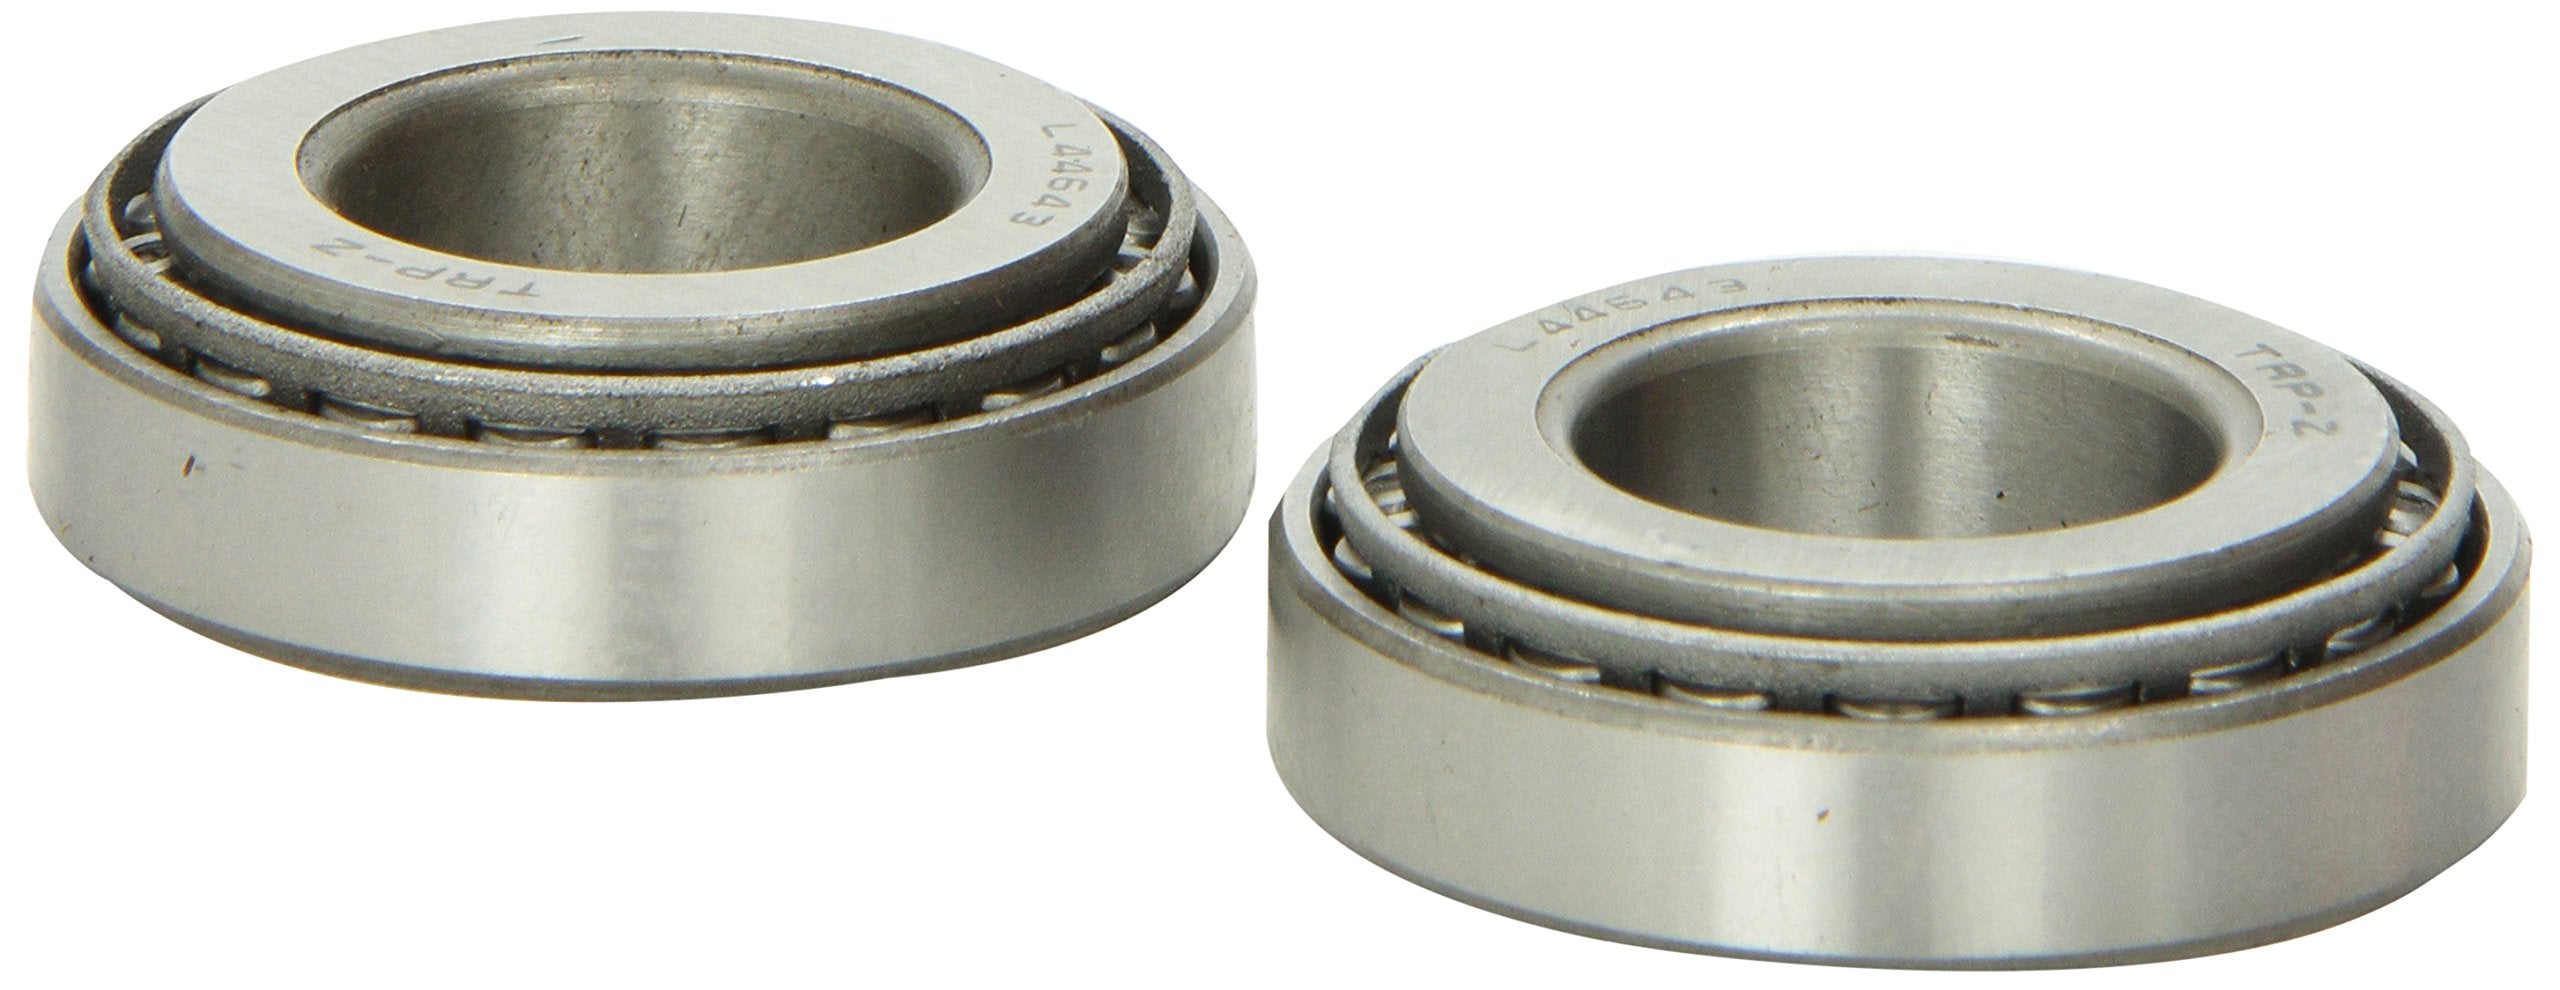 AP Products 014-1250 Axle Bearing Complete Kit